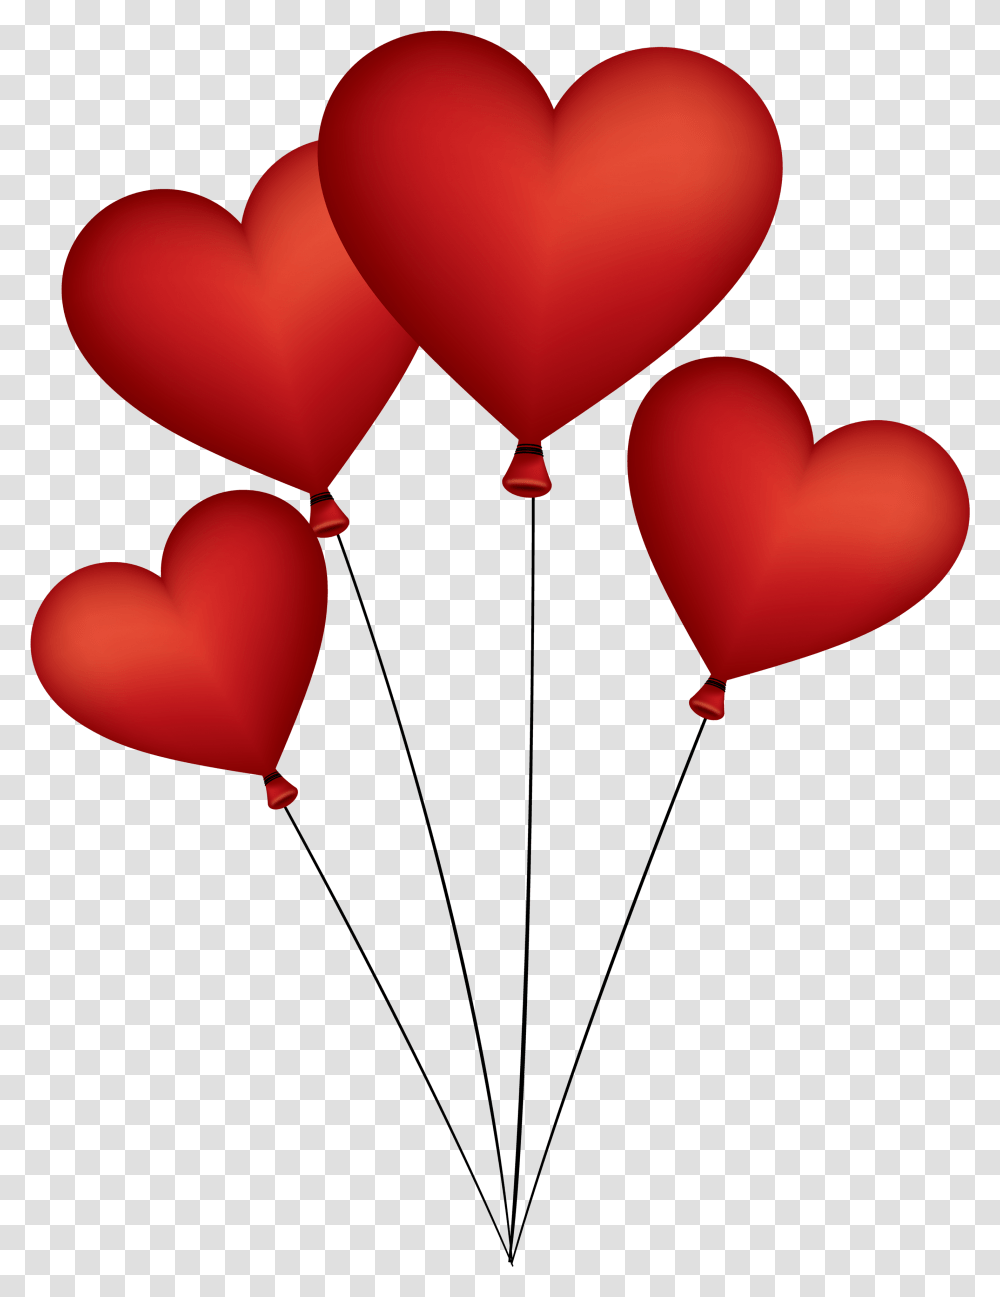 Heart Balloon Image Heart Balloon Images Transparent Png